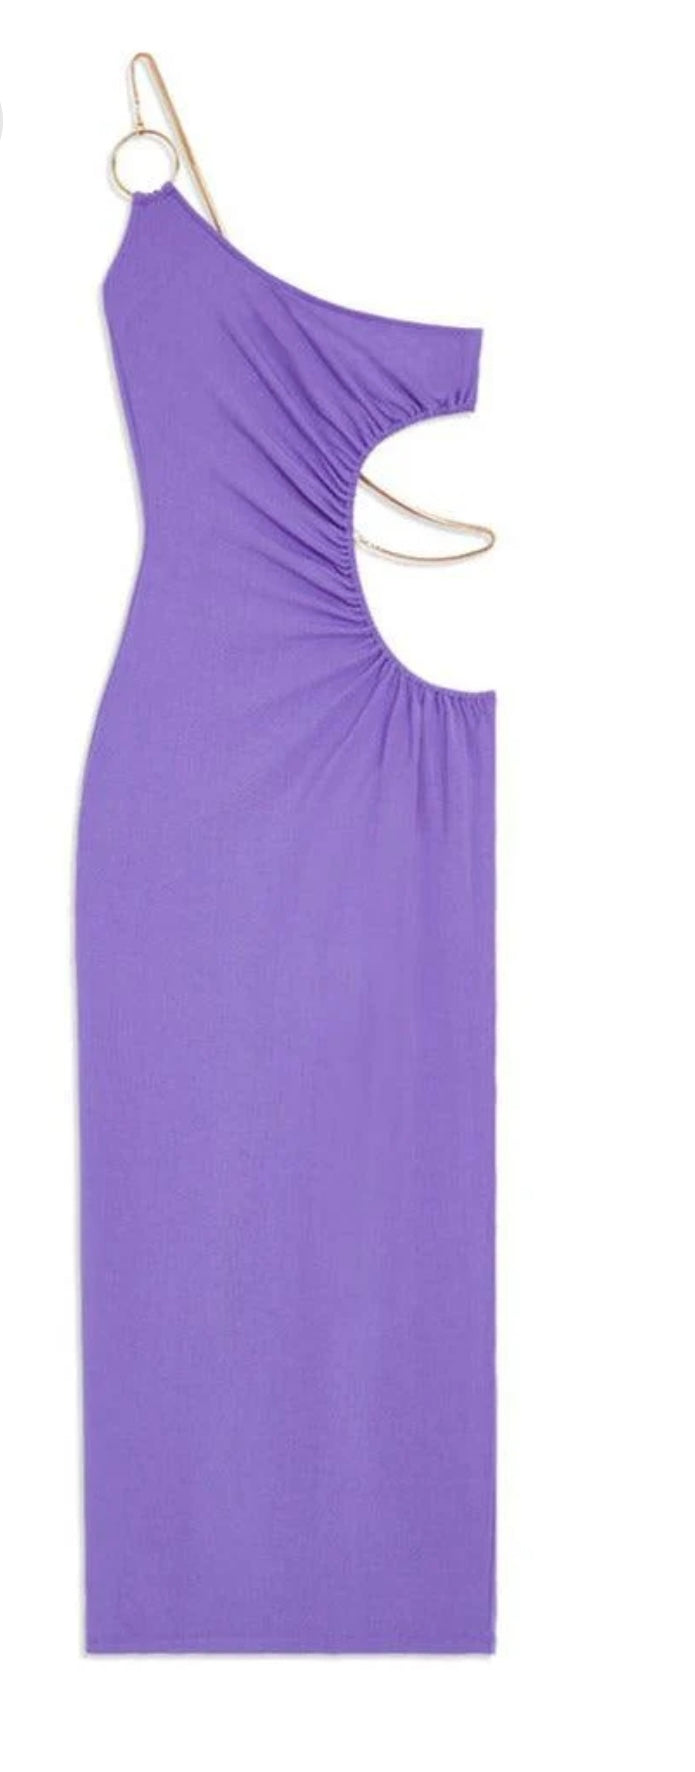 WeWoreWhat - Snake chain Cut Out Maxi Dress in Electric Purple